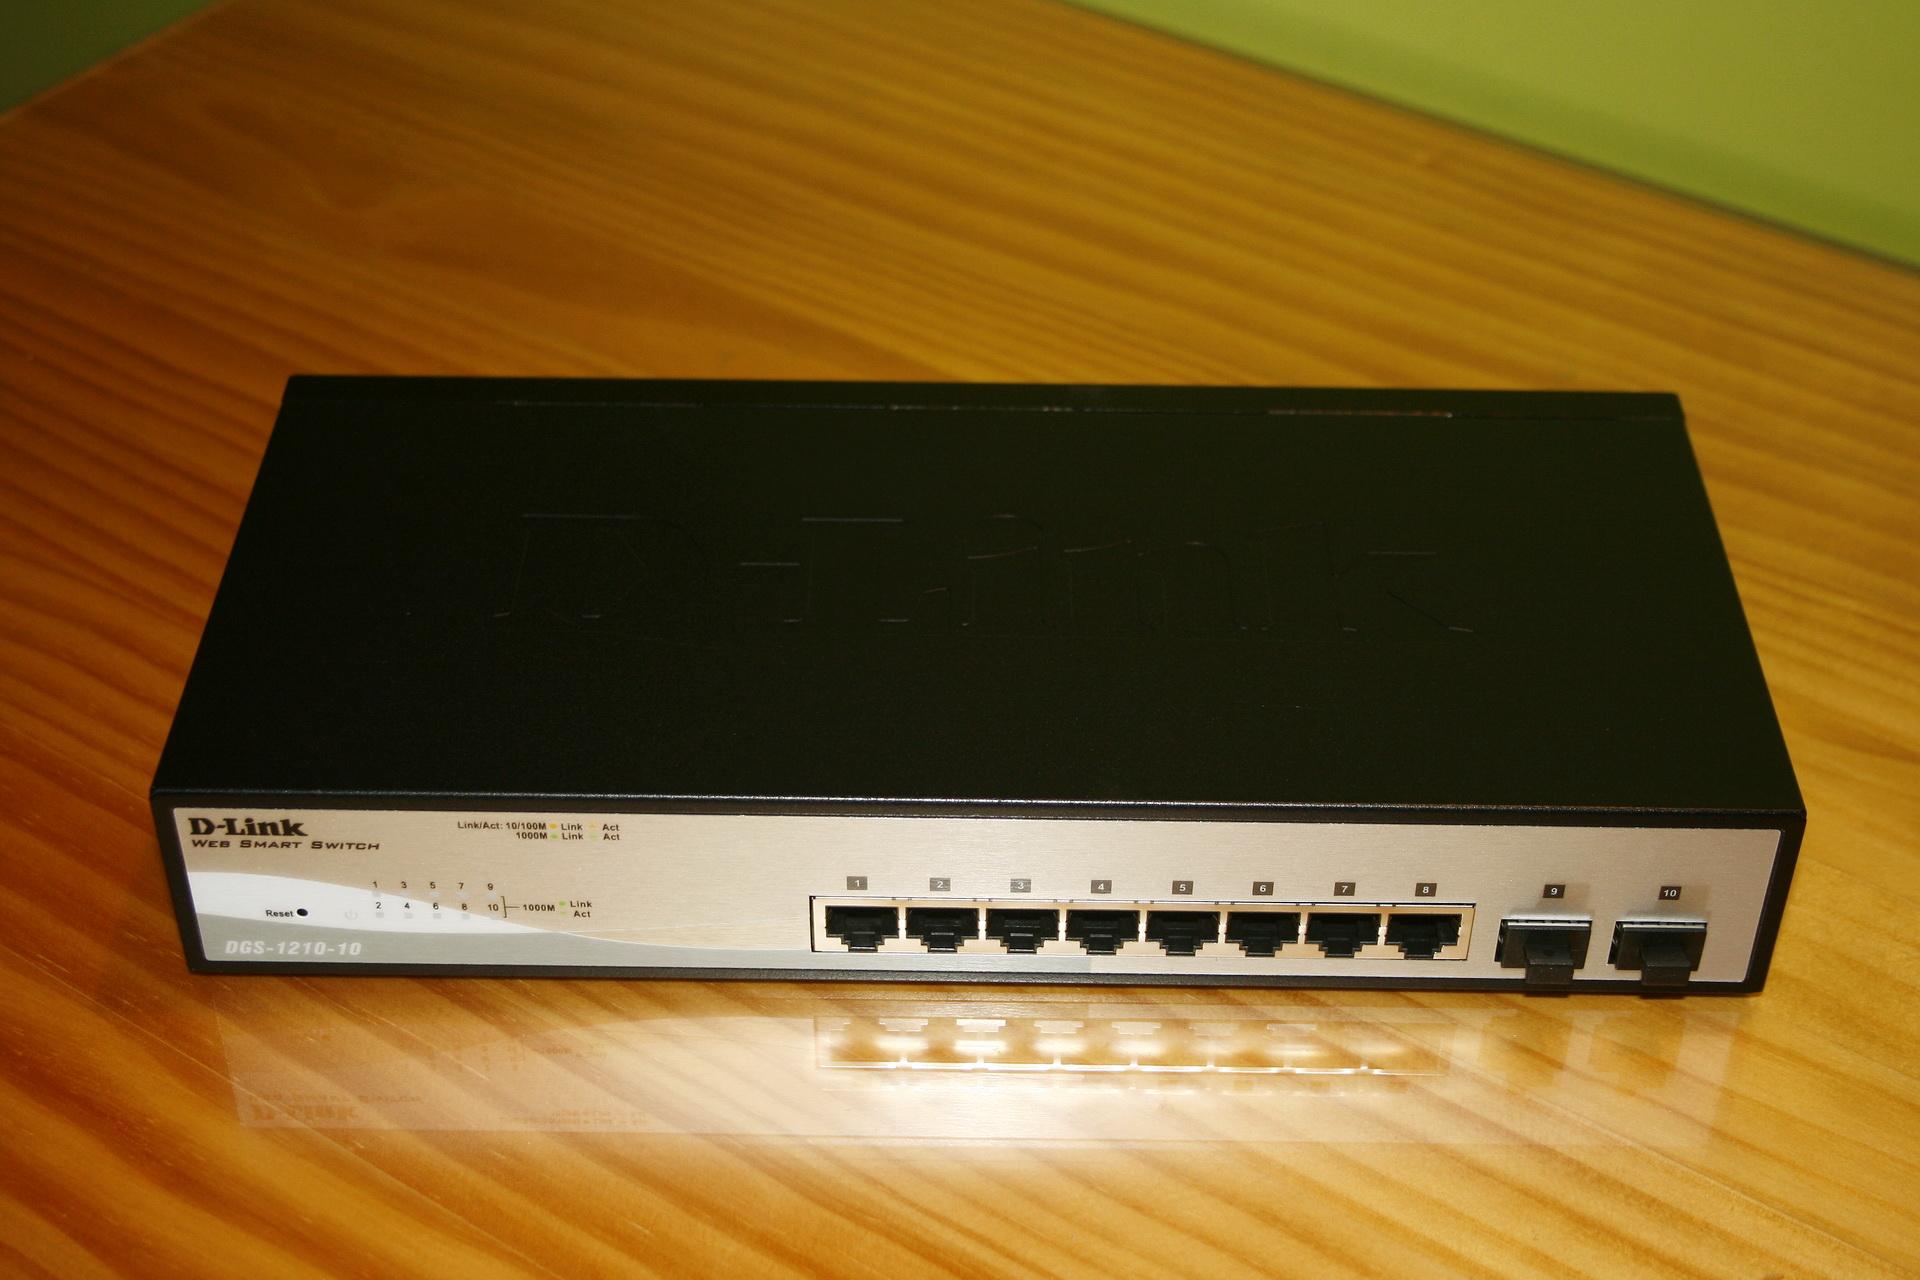 Frontal del switch gestionable D-Link DGS-1210-10